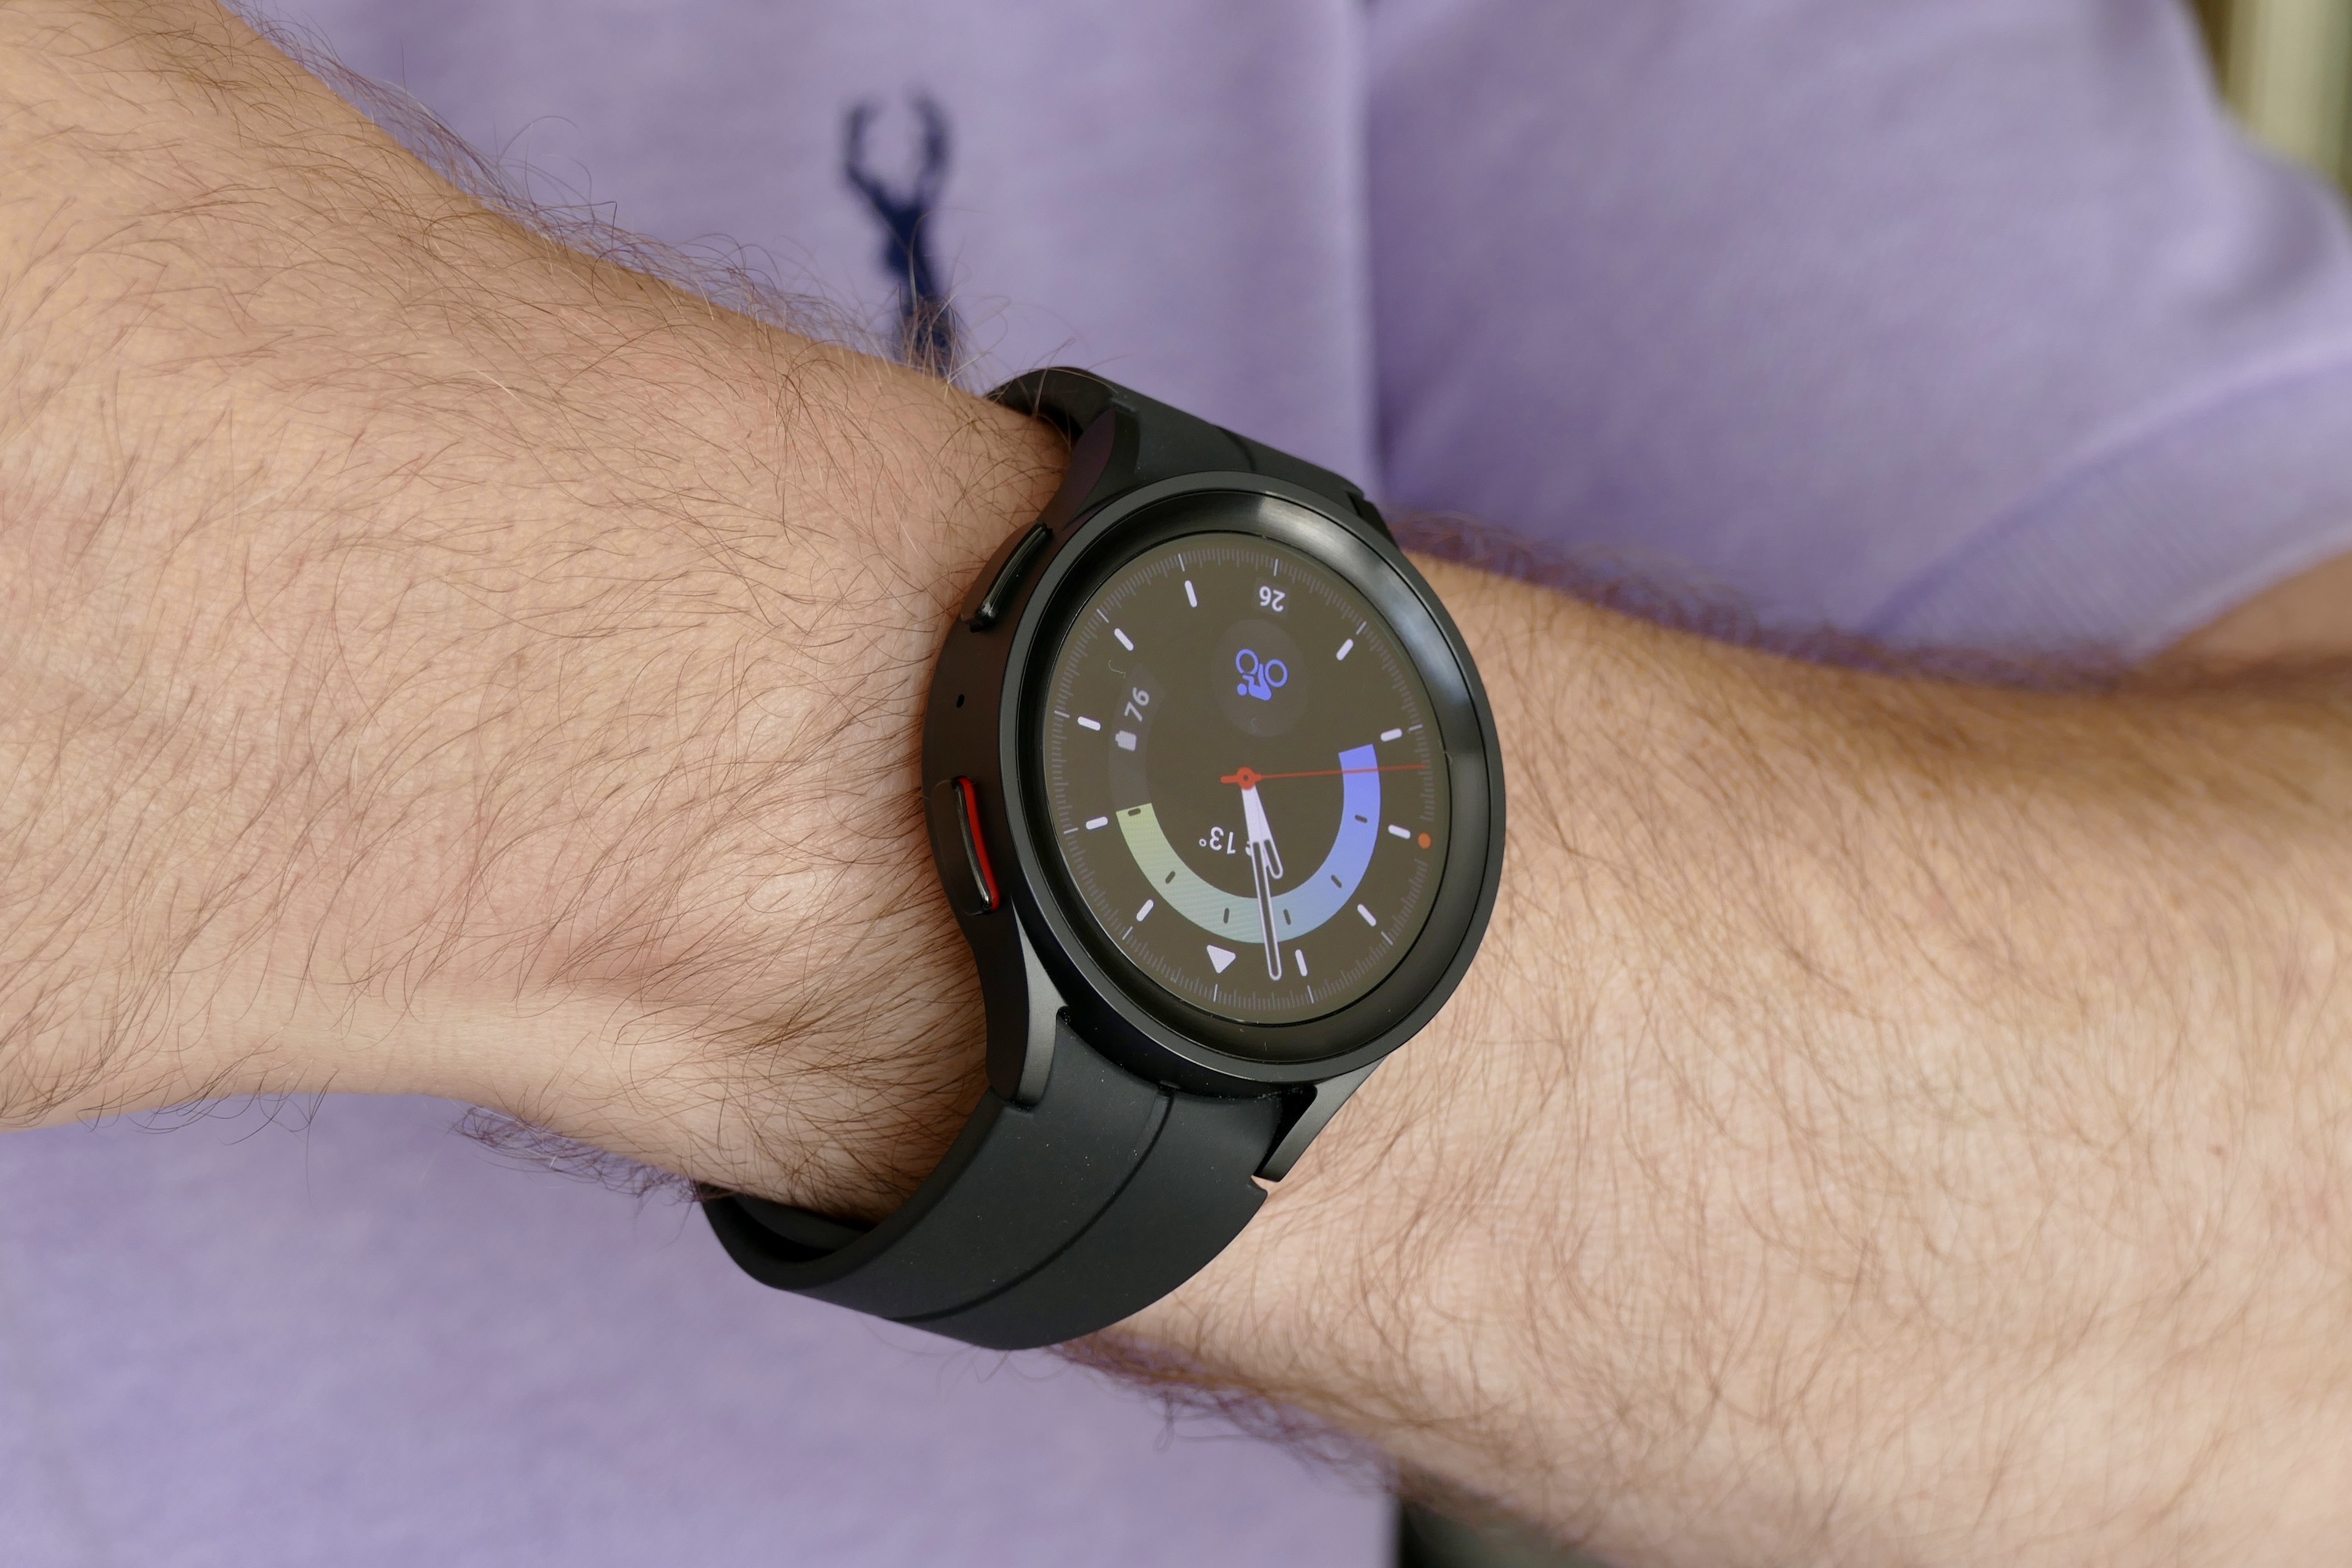 Galaxy Watch5 I Watch5 Pro : Comment porter et changer son